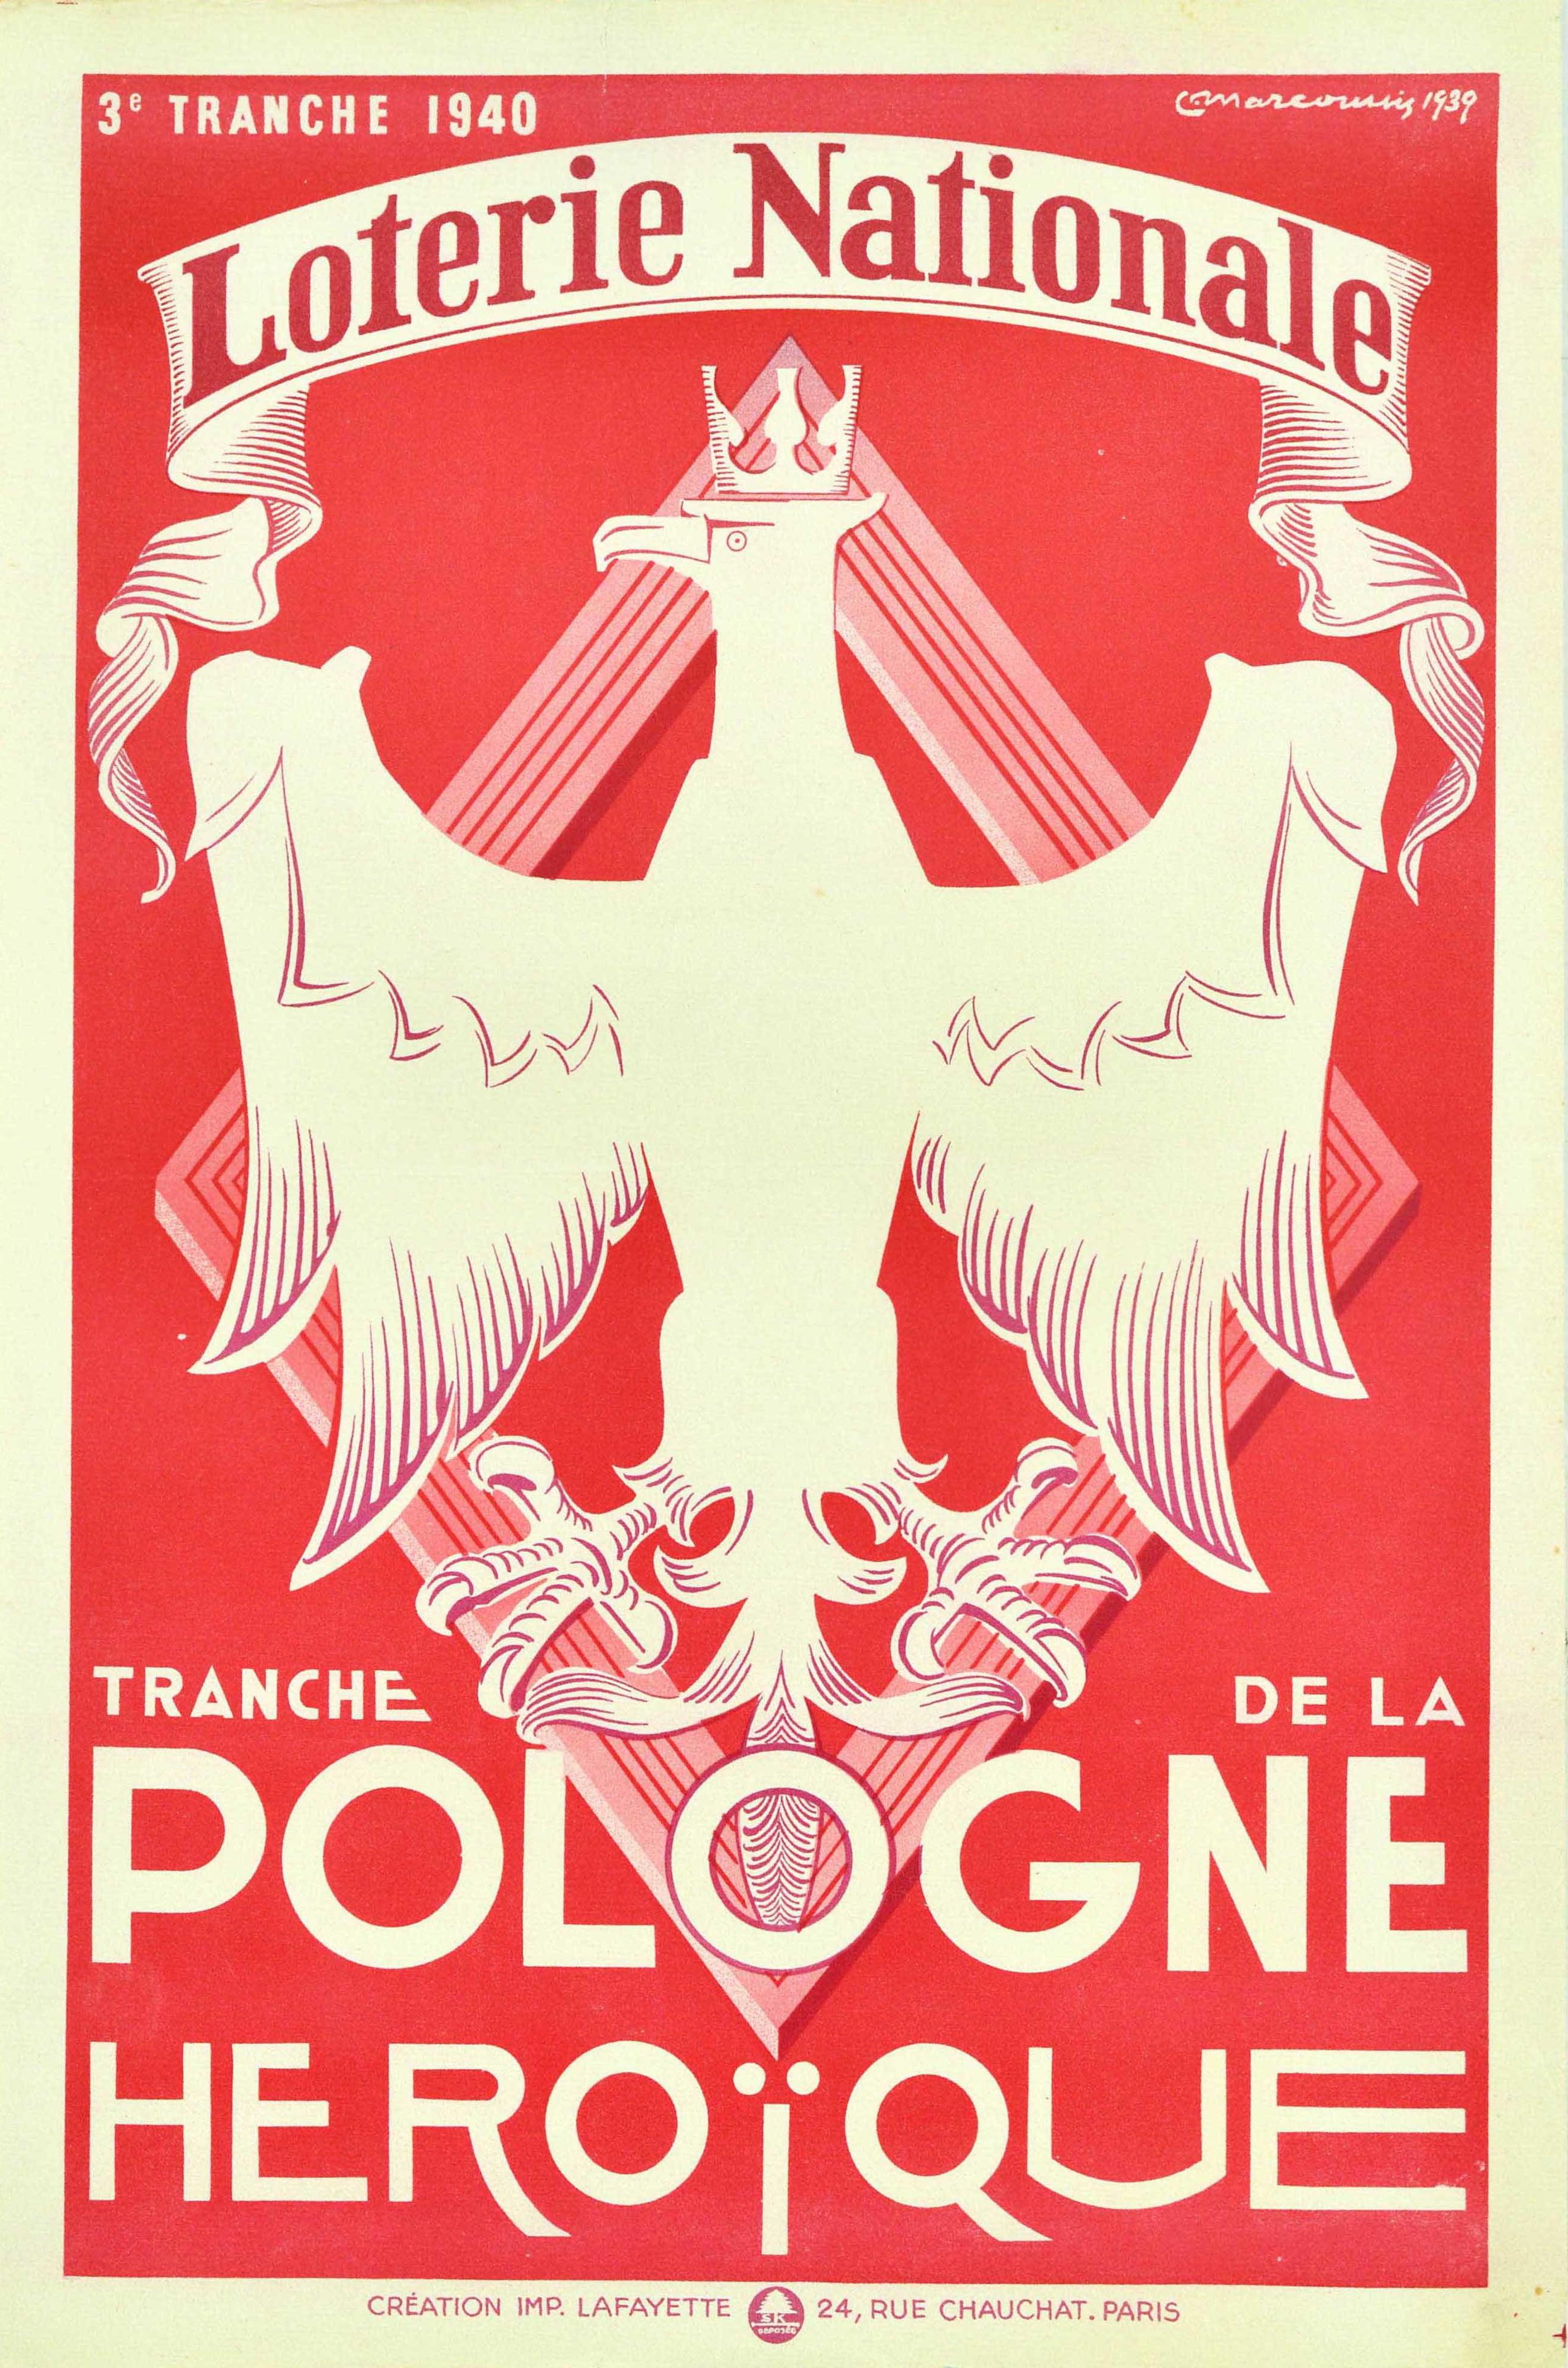 Unknown Print - Original Vintage Advertising Poster National Lottery Heroic Poland Pologne Eagle